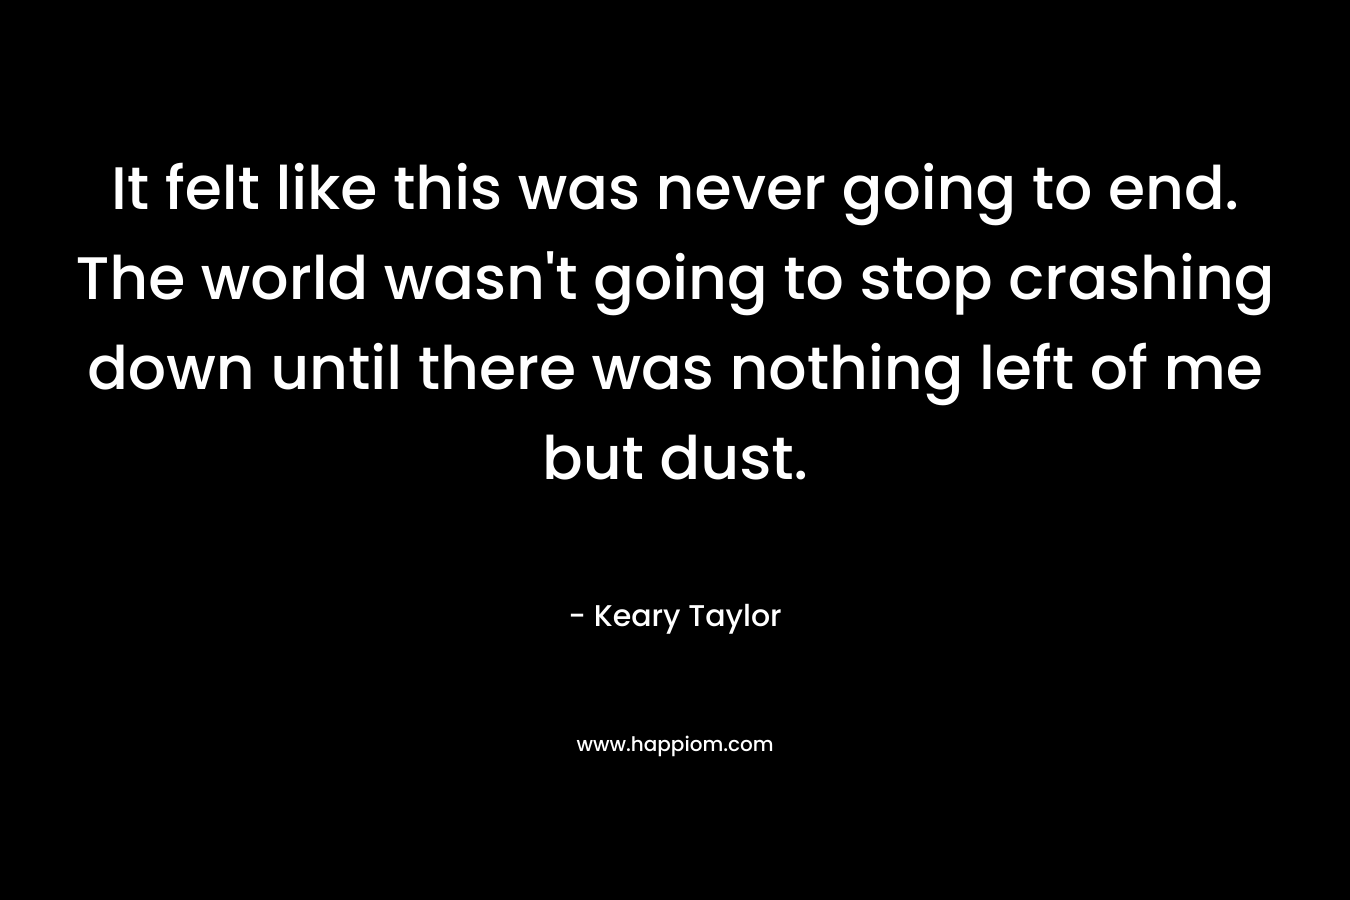 It felt like this was never going to end. The world wasn’t going to stop crashing down until there was nothing left of me but dust. – Keary Taylor